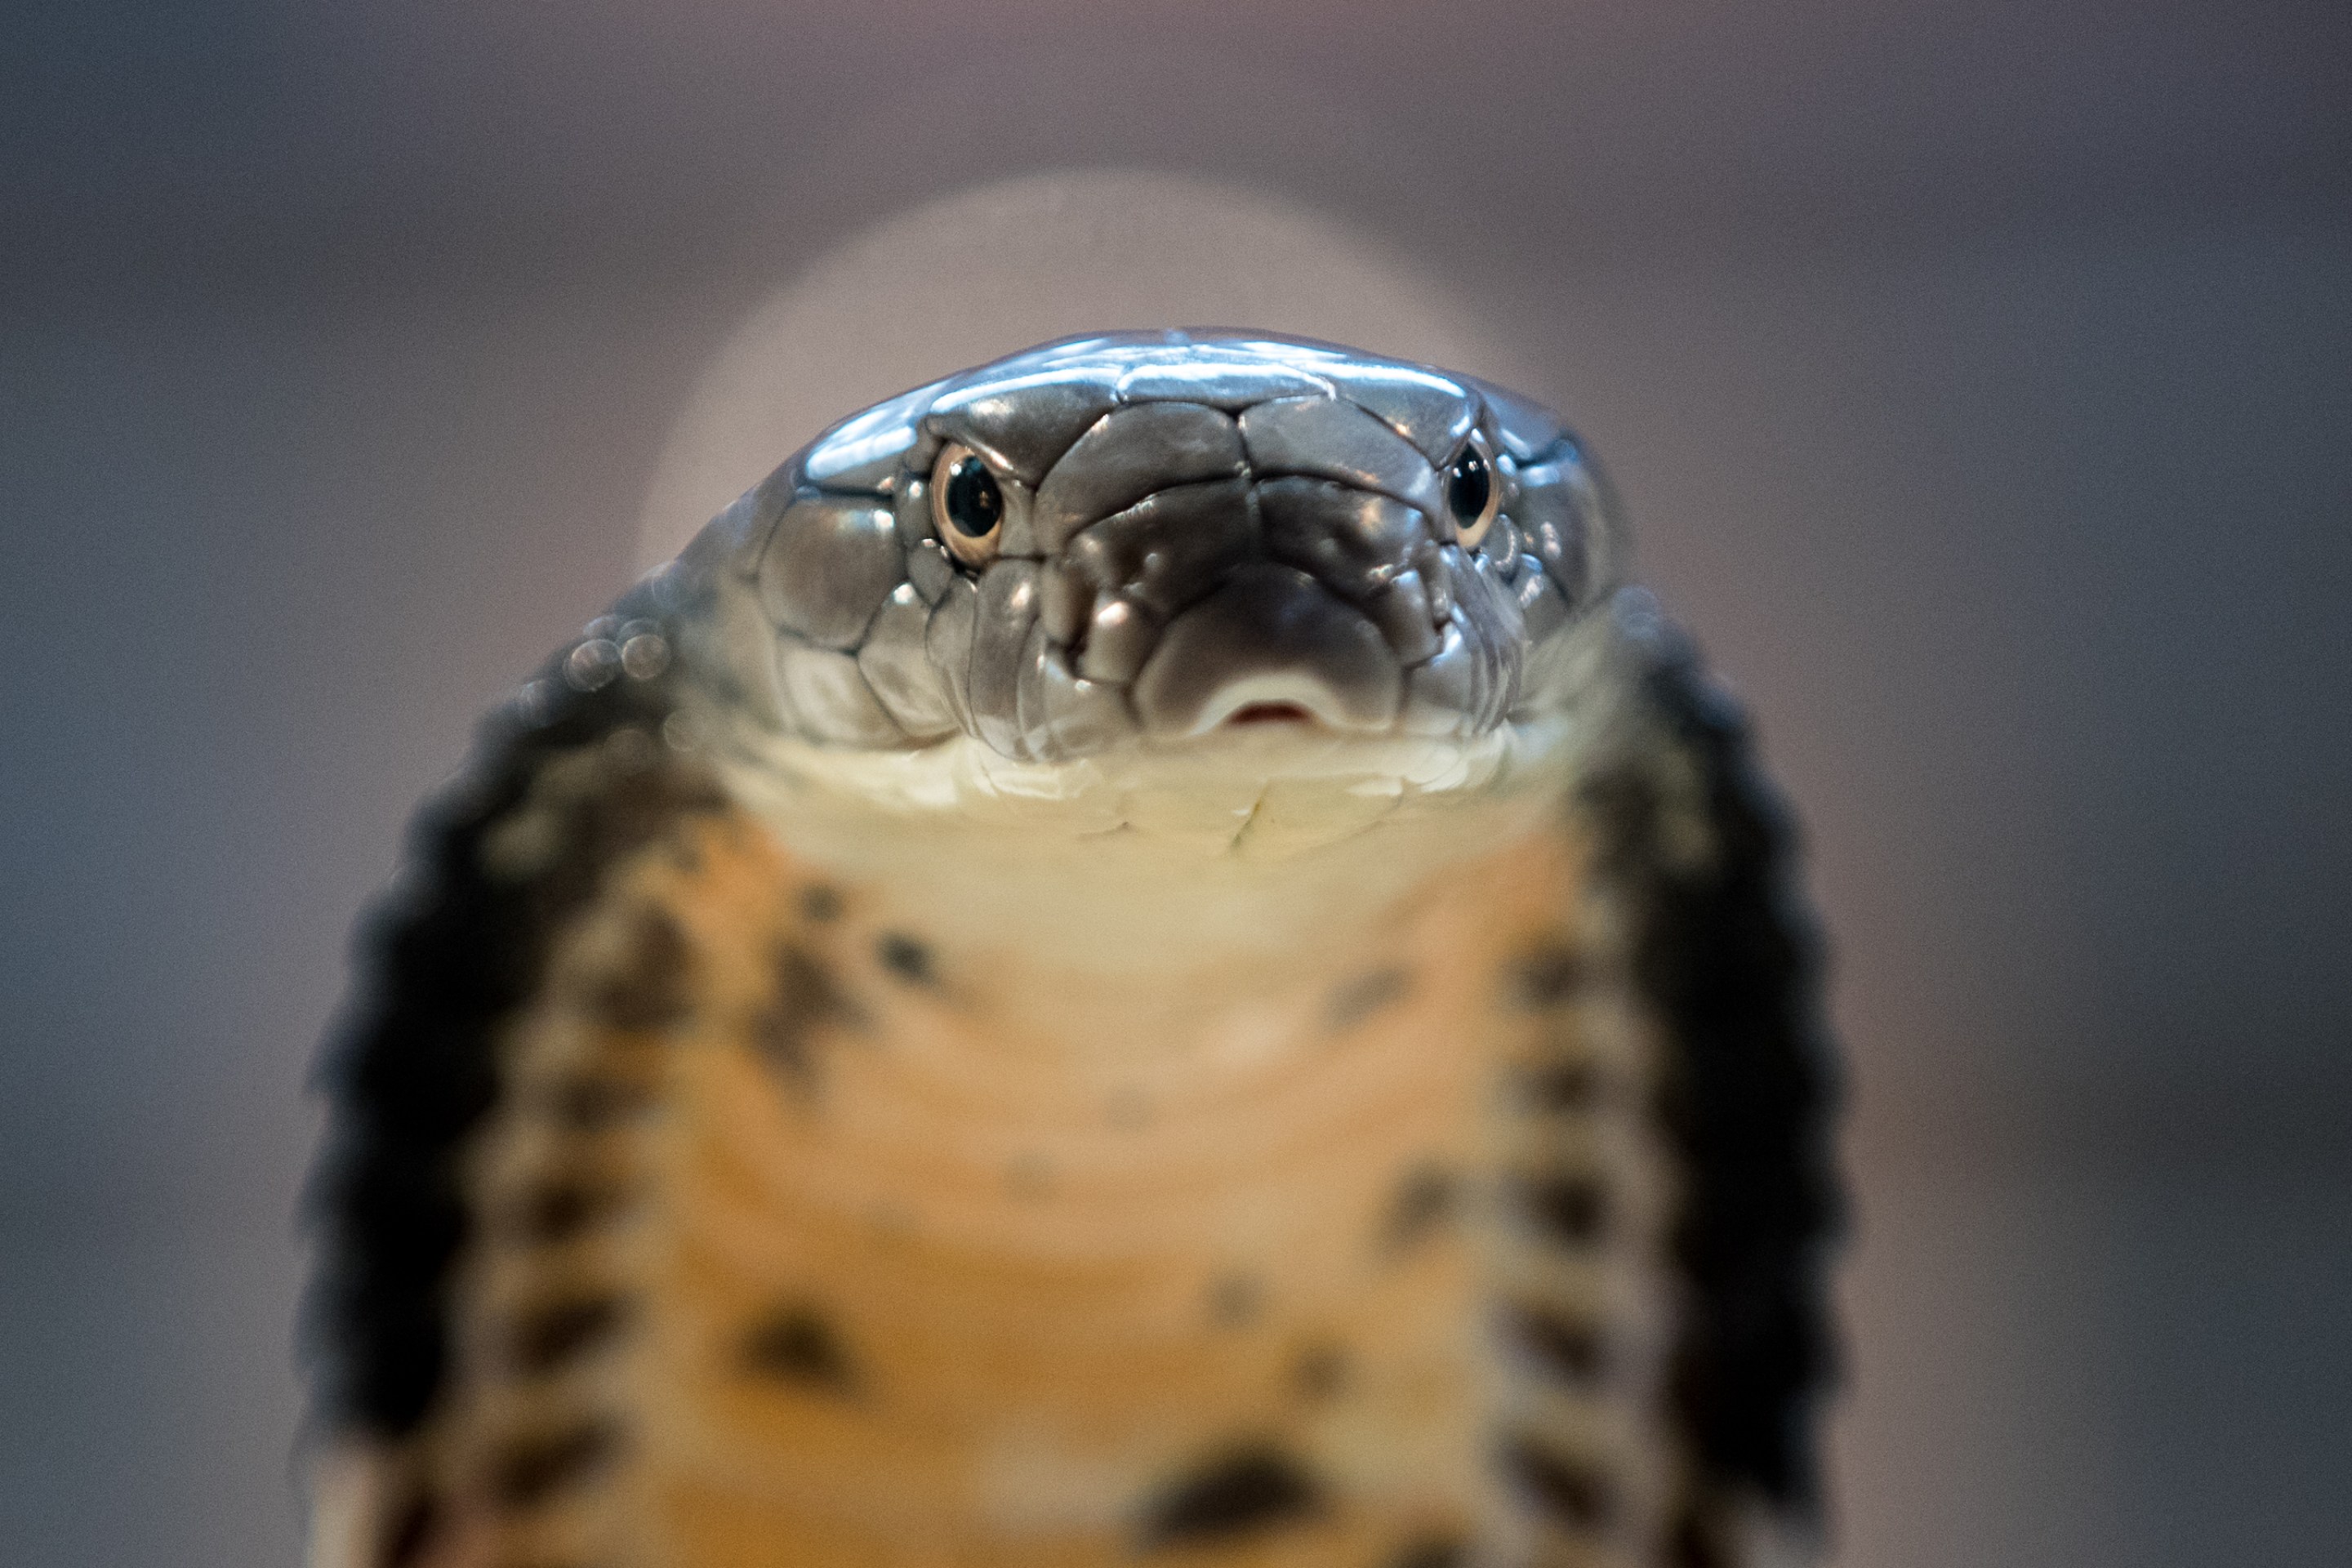 BRISTOL, ENGLAND - AUGUST 02: A King Cobra is displayed to the public at Noah's Ark Zoo Farm on August 2, 2016 in Bristol, England. Noah's Ark Zoo Farm has teamed up with the Reptile Zone in Bristol to bring a fortnight of educational shows which allows members of the public to see some of the world's most deadliest reptiles close up. The annual event showcases some of the world's most notorious snakes behind a specially constructed presentation room. (Photo by Matt Cardy/Getty Images)